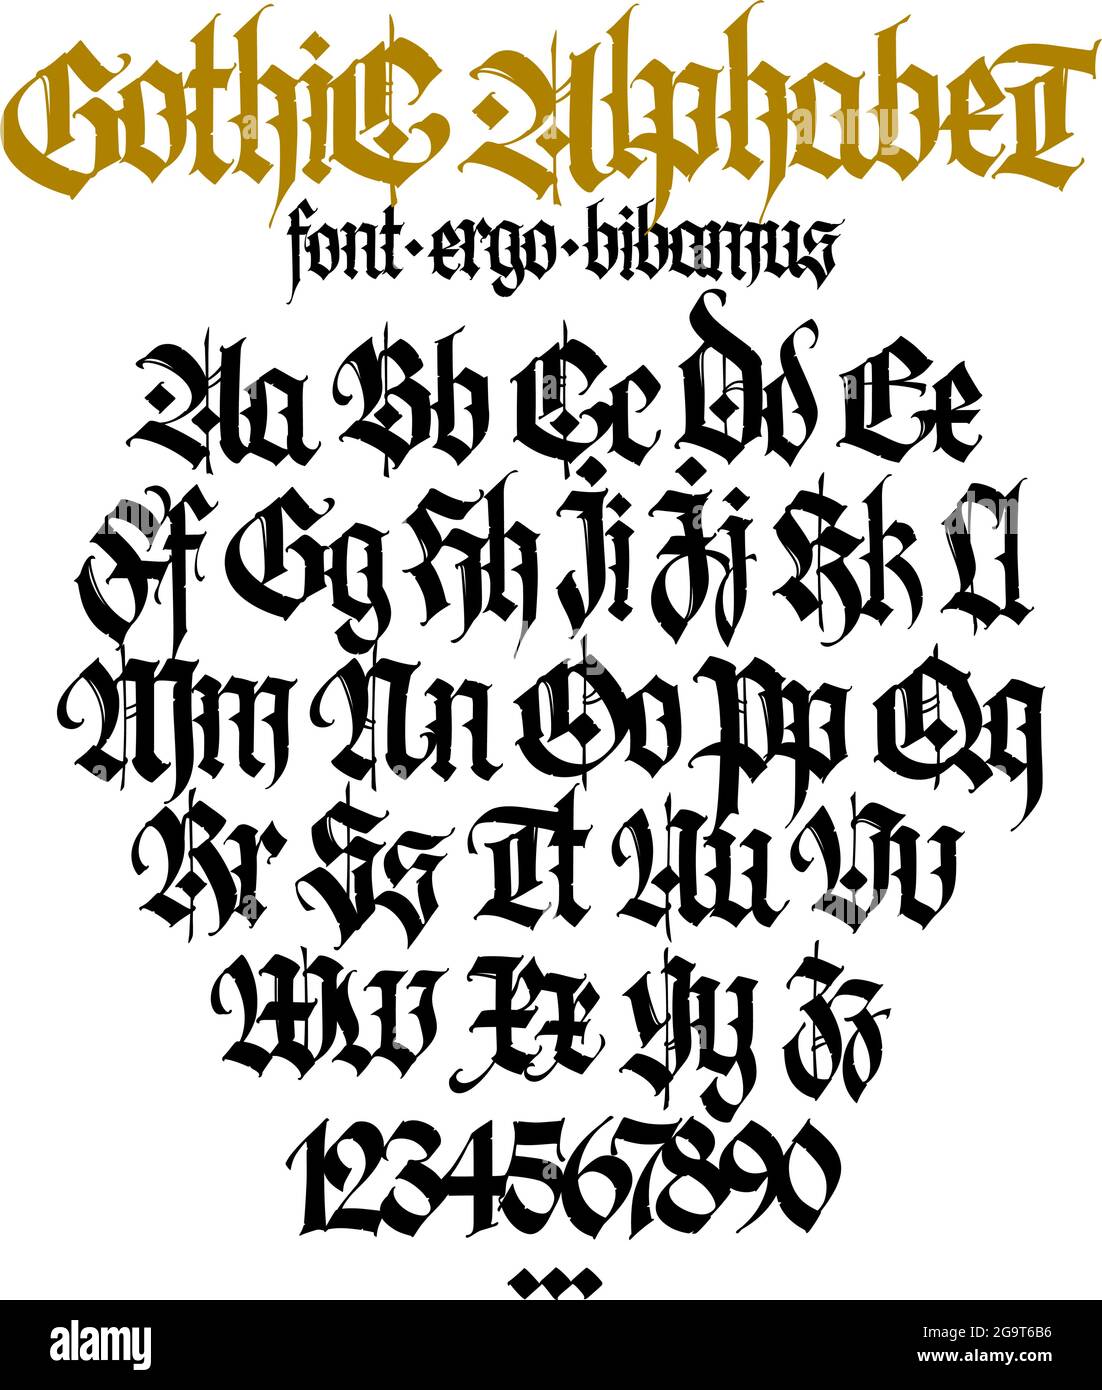 Aggregate 82+ gothic letters for tattoos latest - in.eteachers